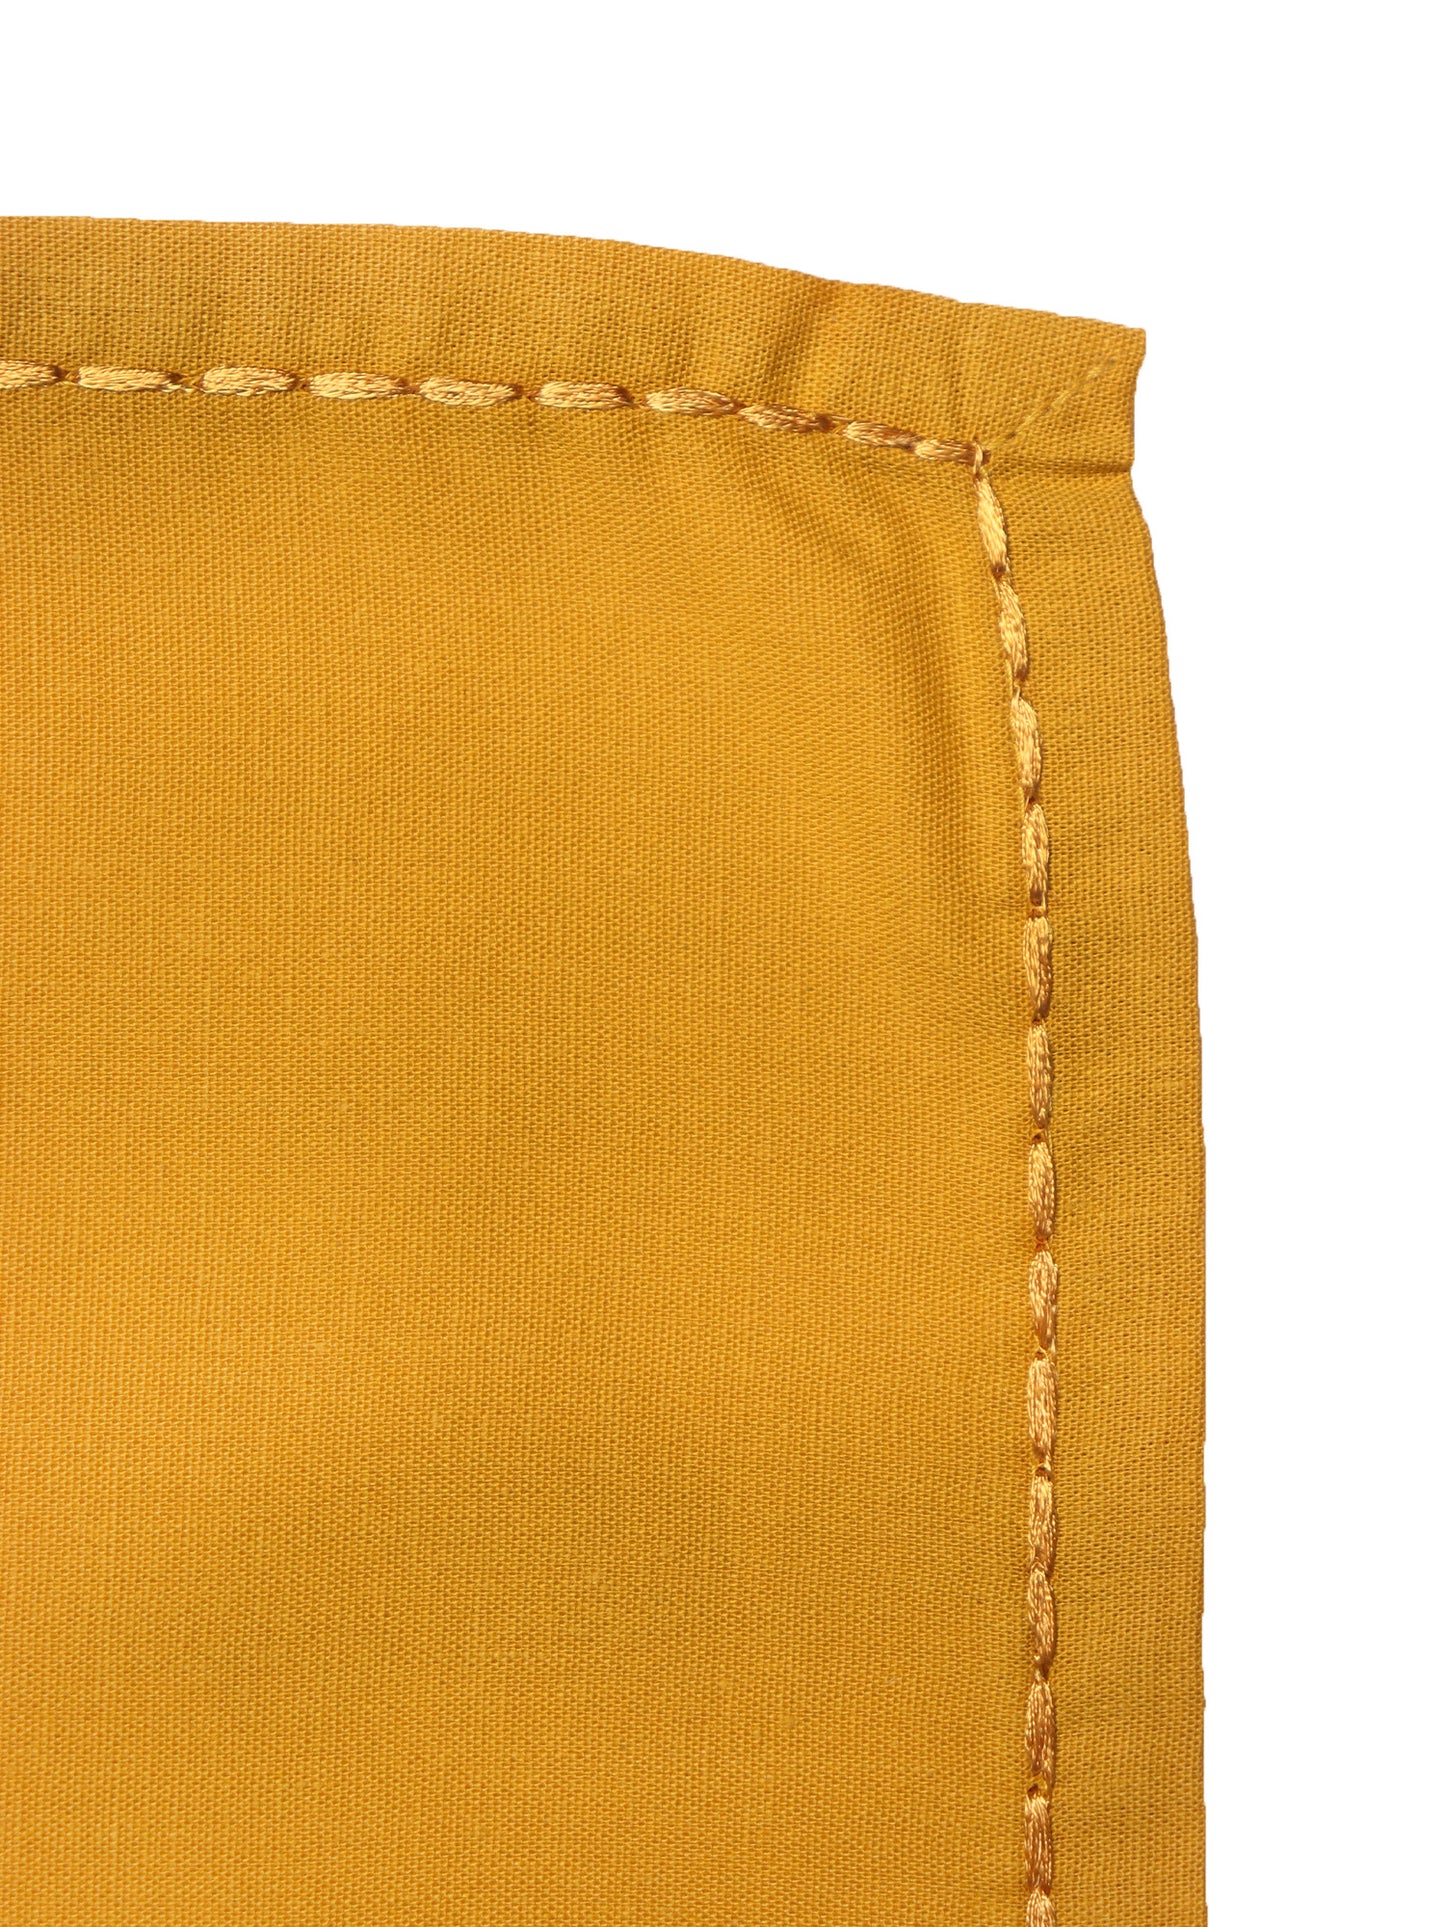 closeup of chawal taka hand embroidered set of 6 dinner napkins in mustard color - 16x16 inch